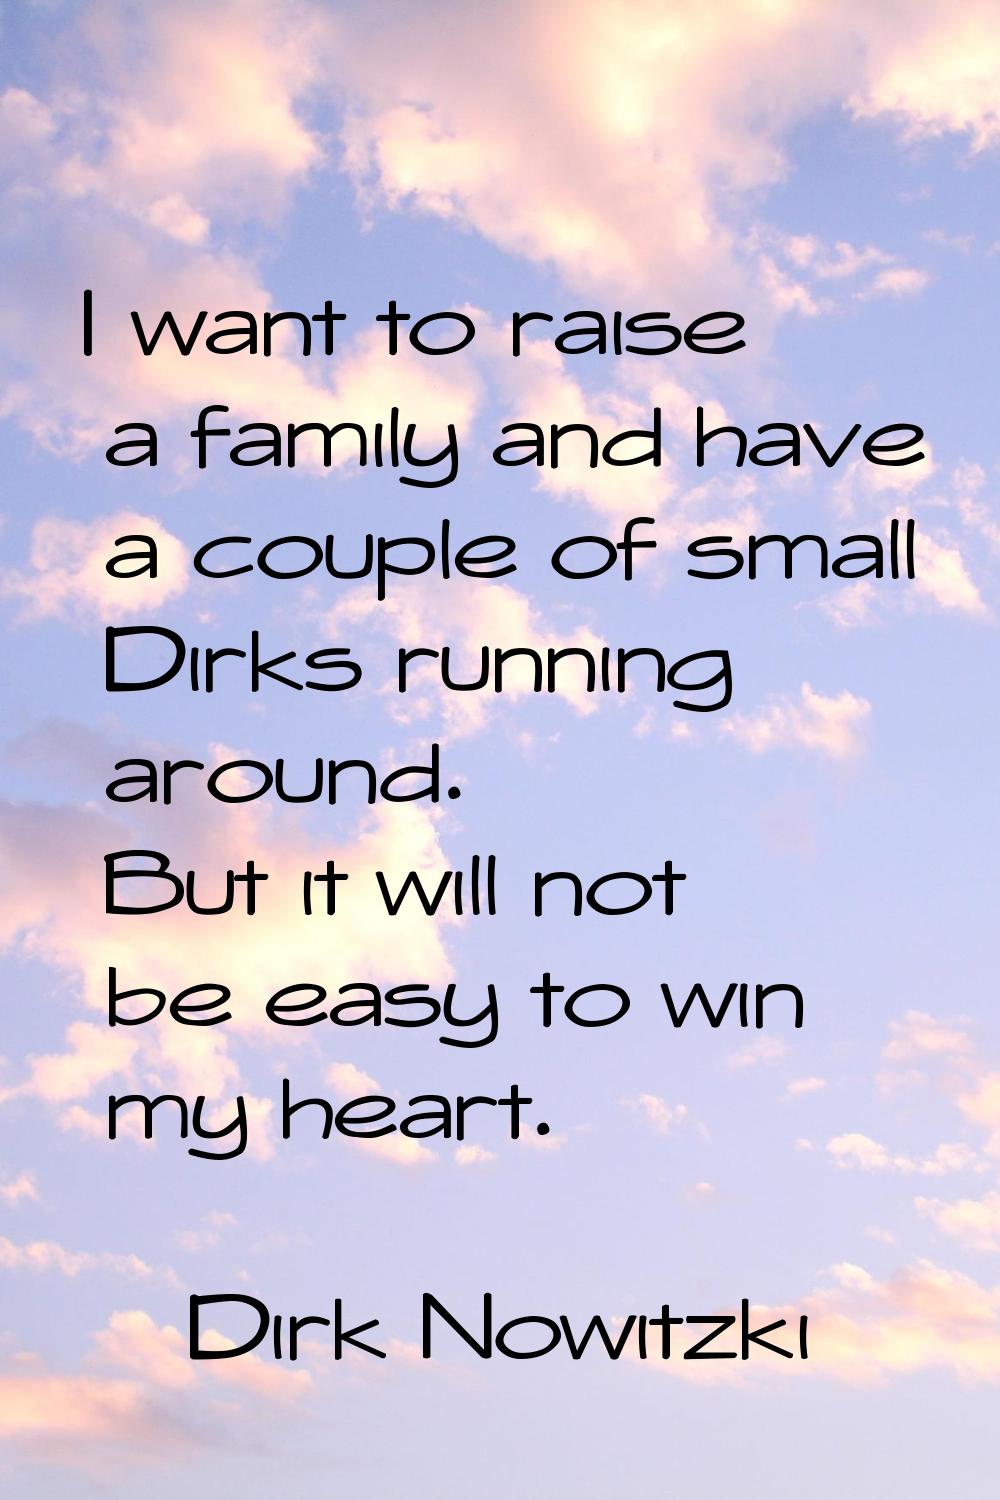 I want to raise a family and have a couple of small Dirks running around. But it will not be easy t